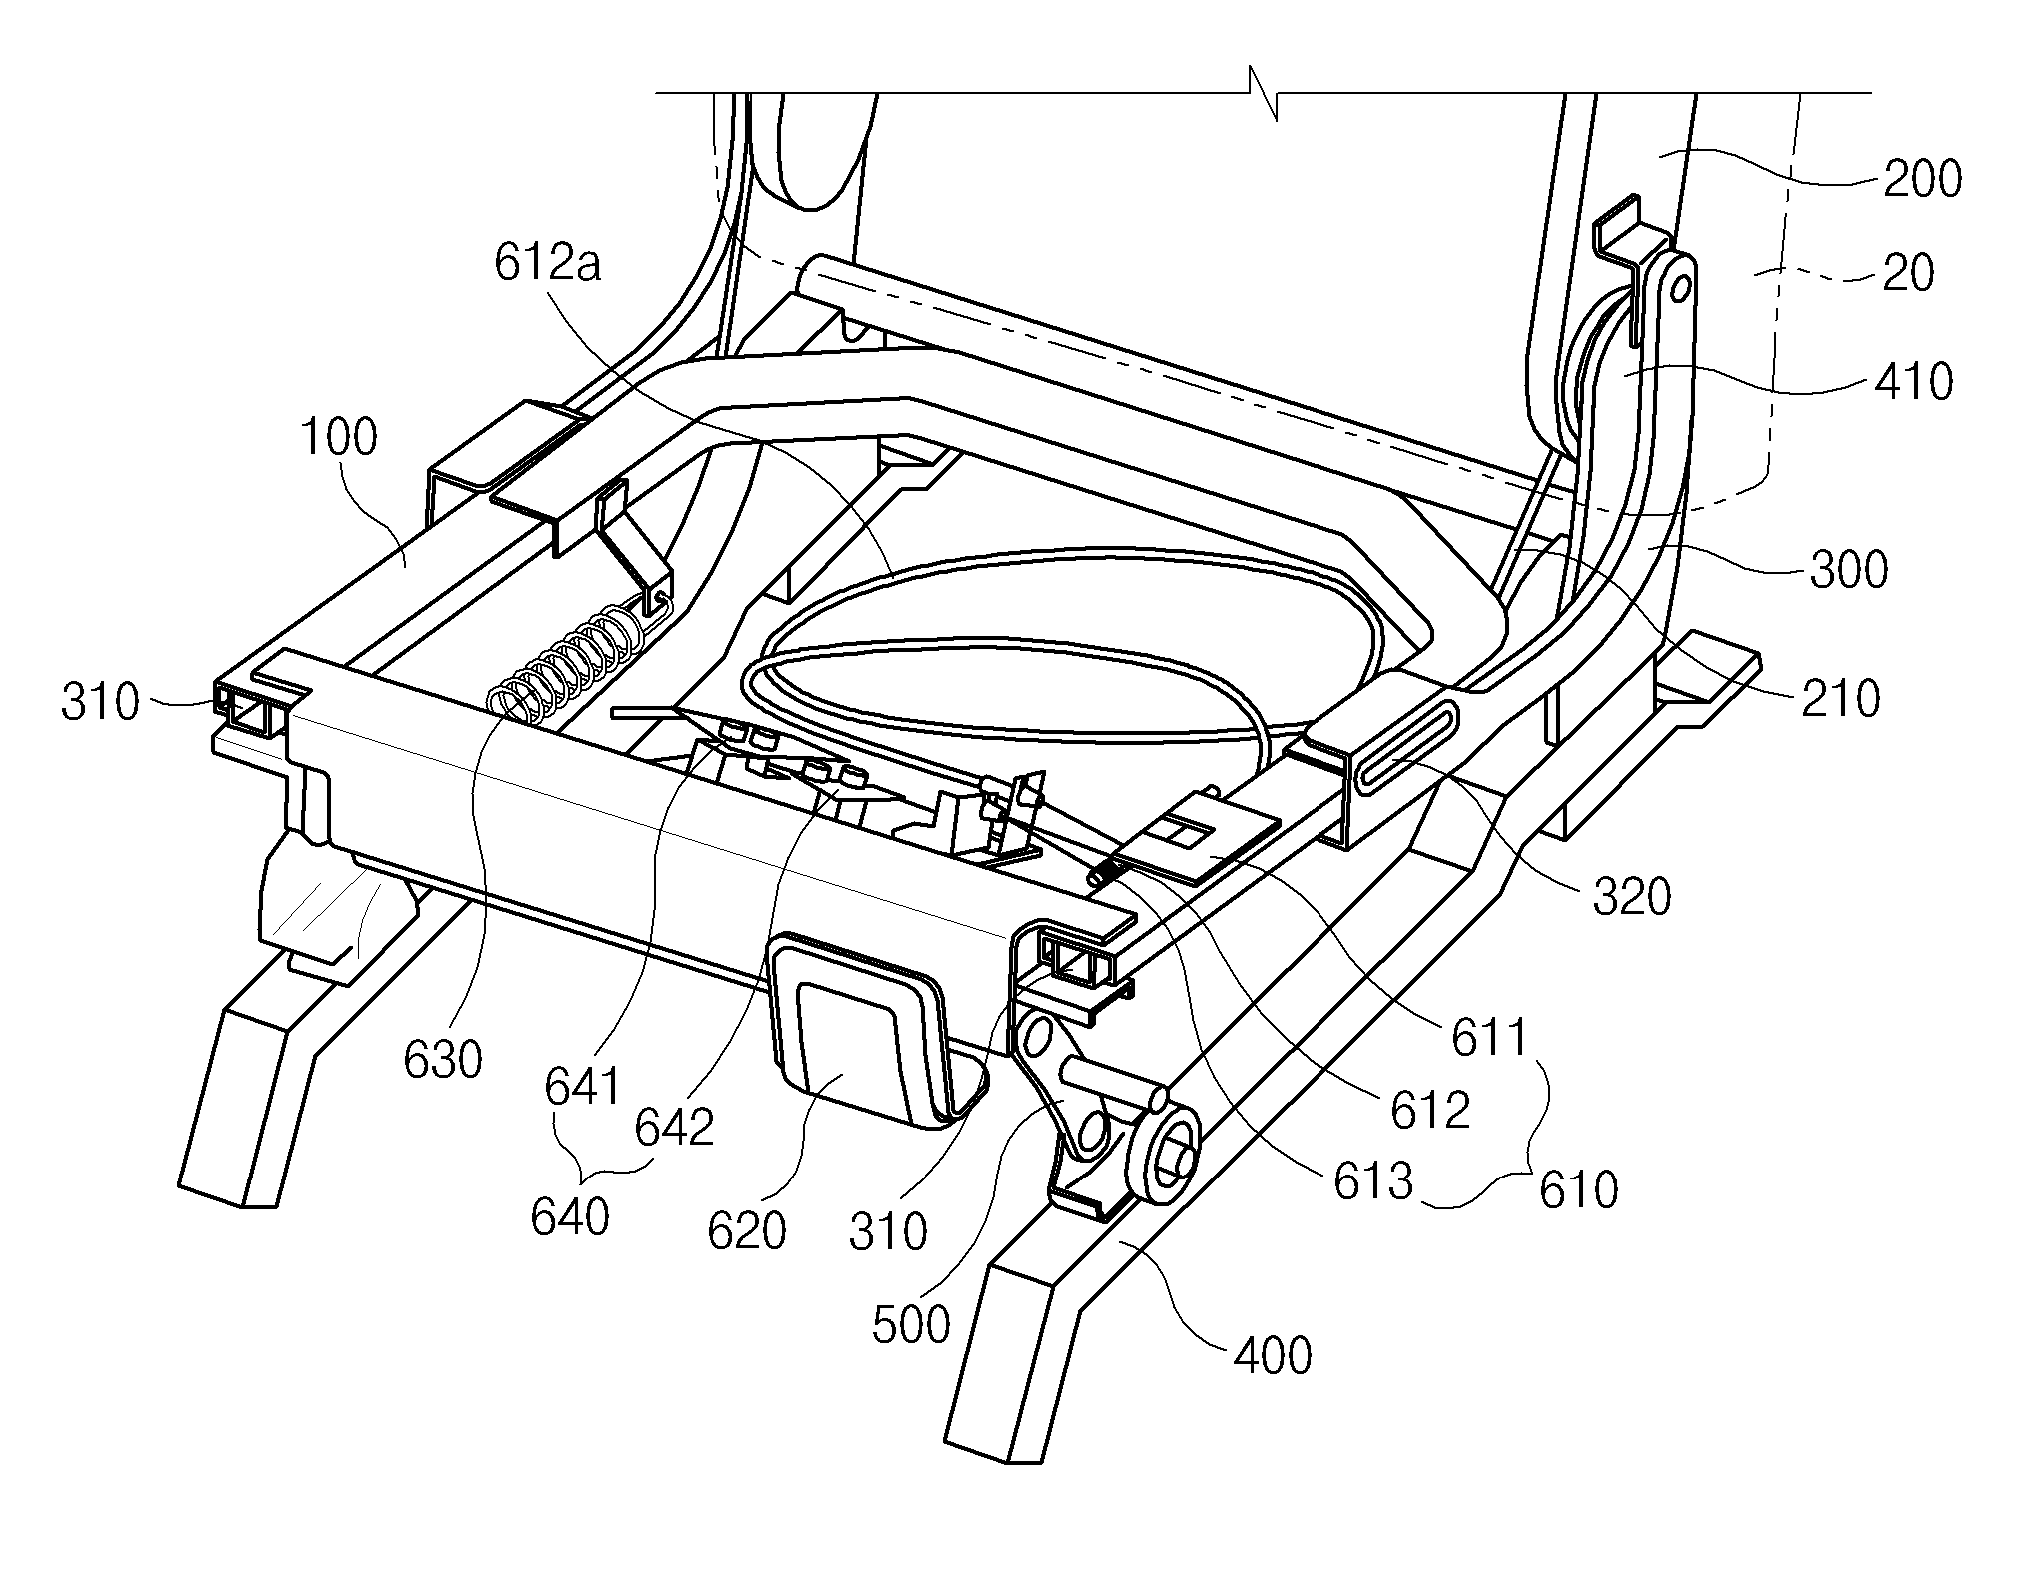 Fold-and dive structure for vehicle seat